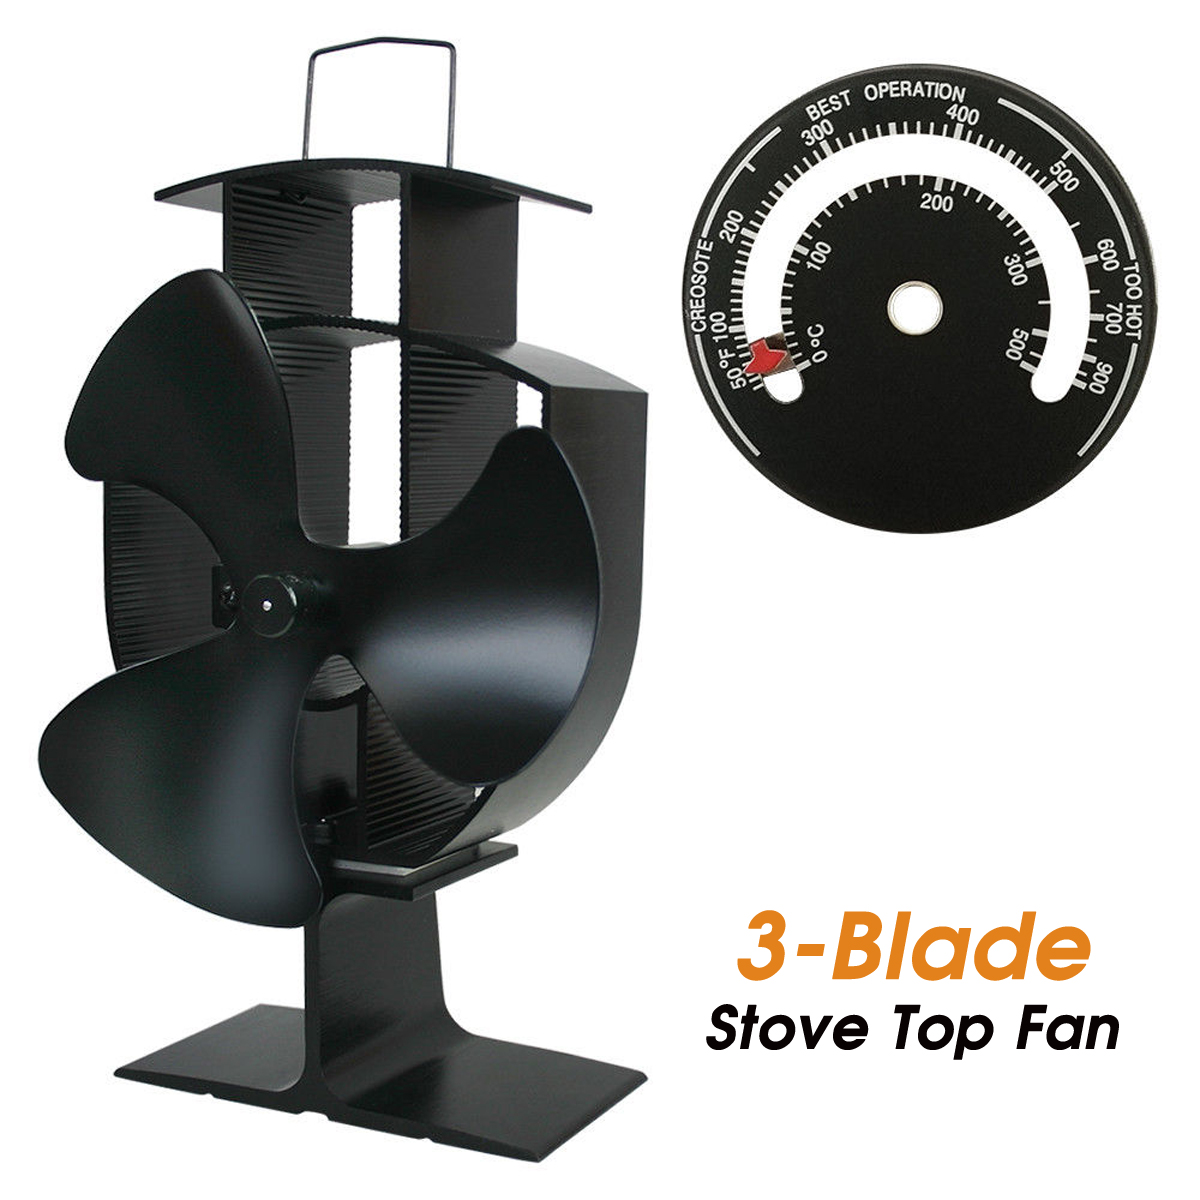 3-Blade-Heat-Powered-Stove-Fan-W-Thermometer-for-Wood-Log-Burning-Burner-Stove-1405753-4